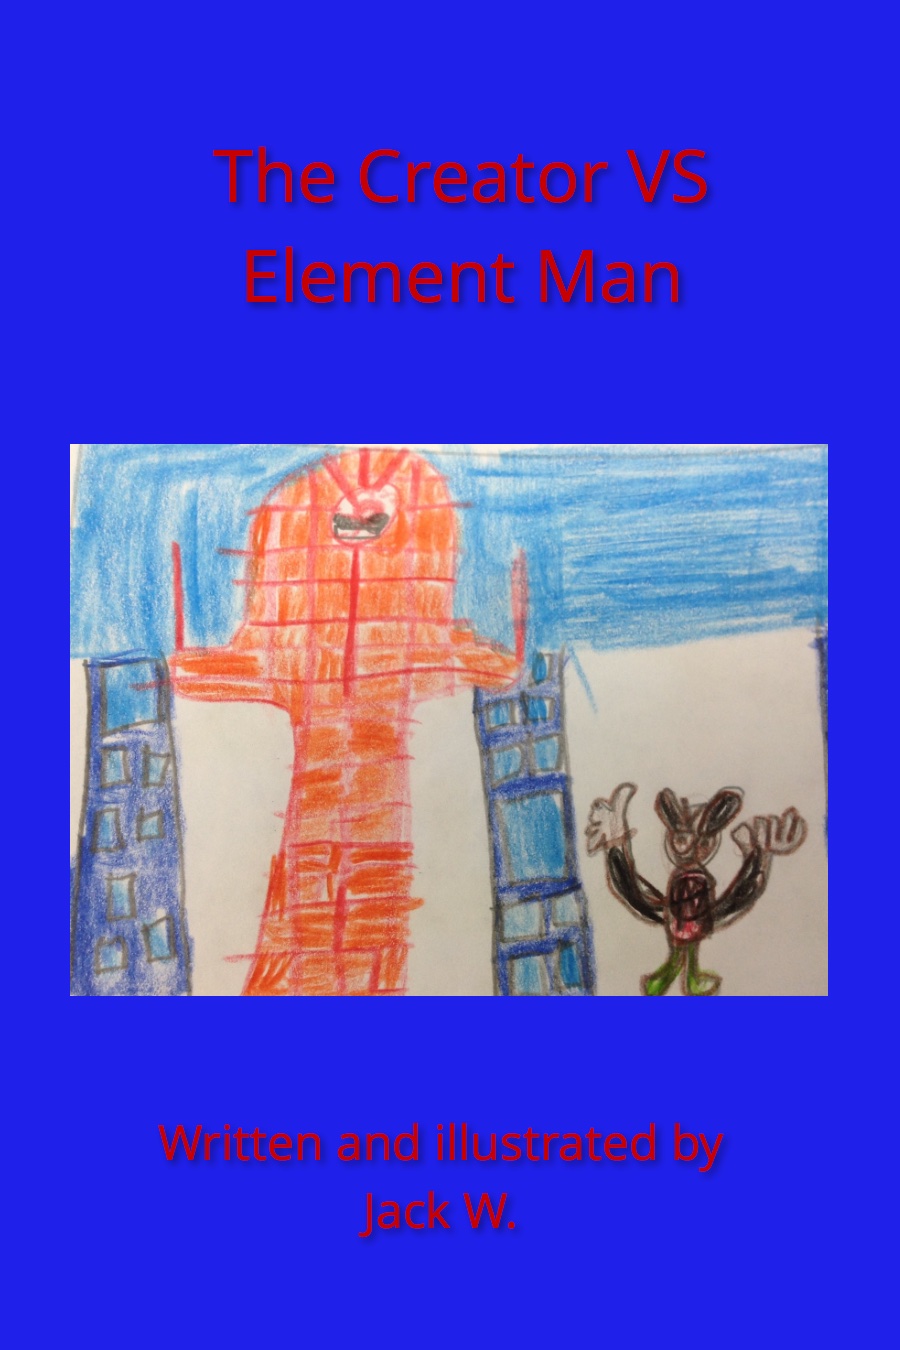 The Creator vs Element Man by Jack